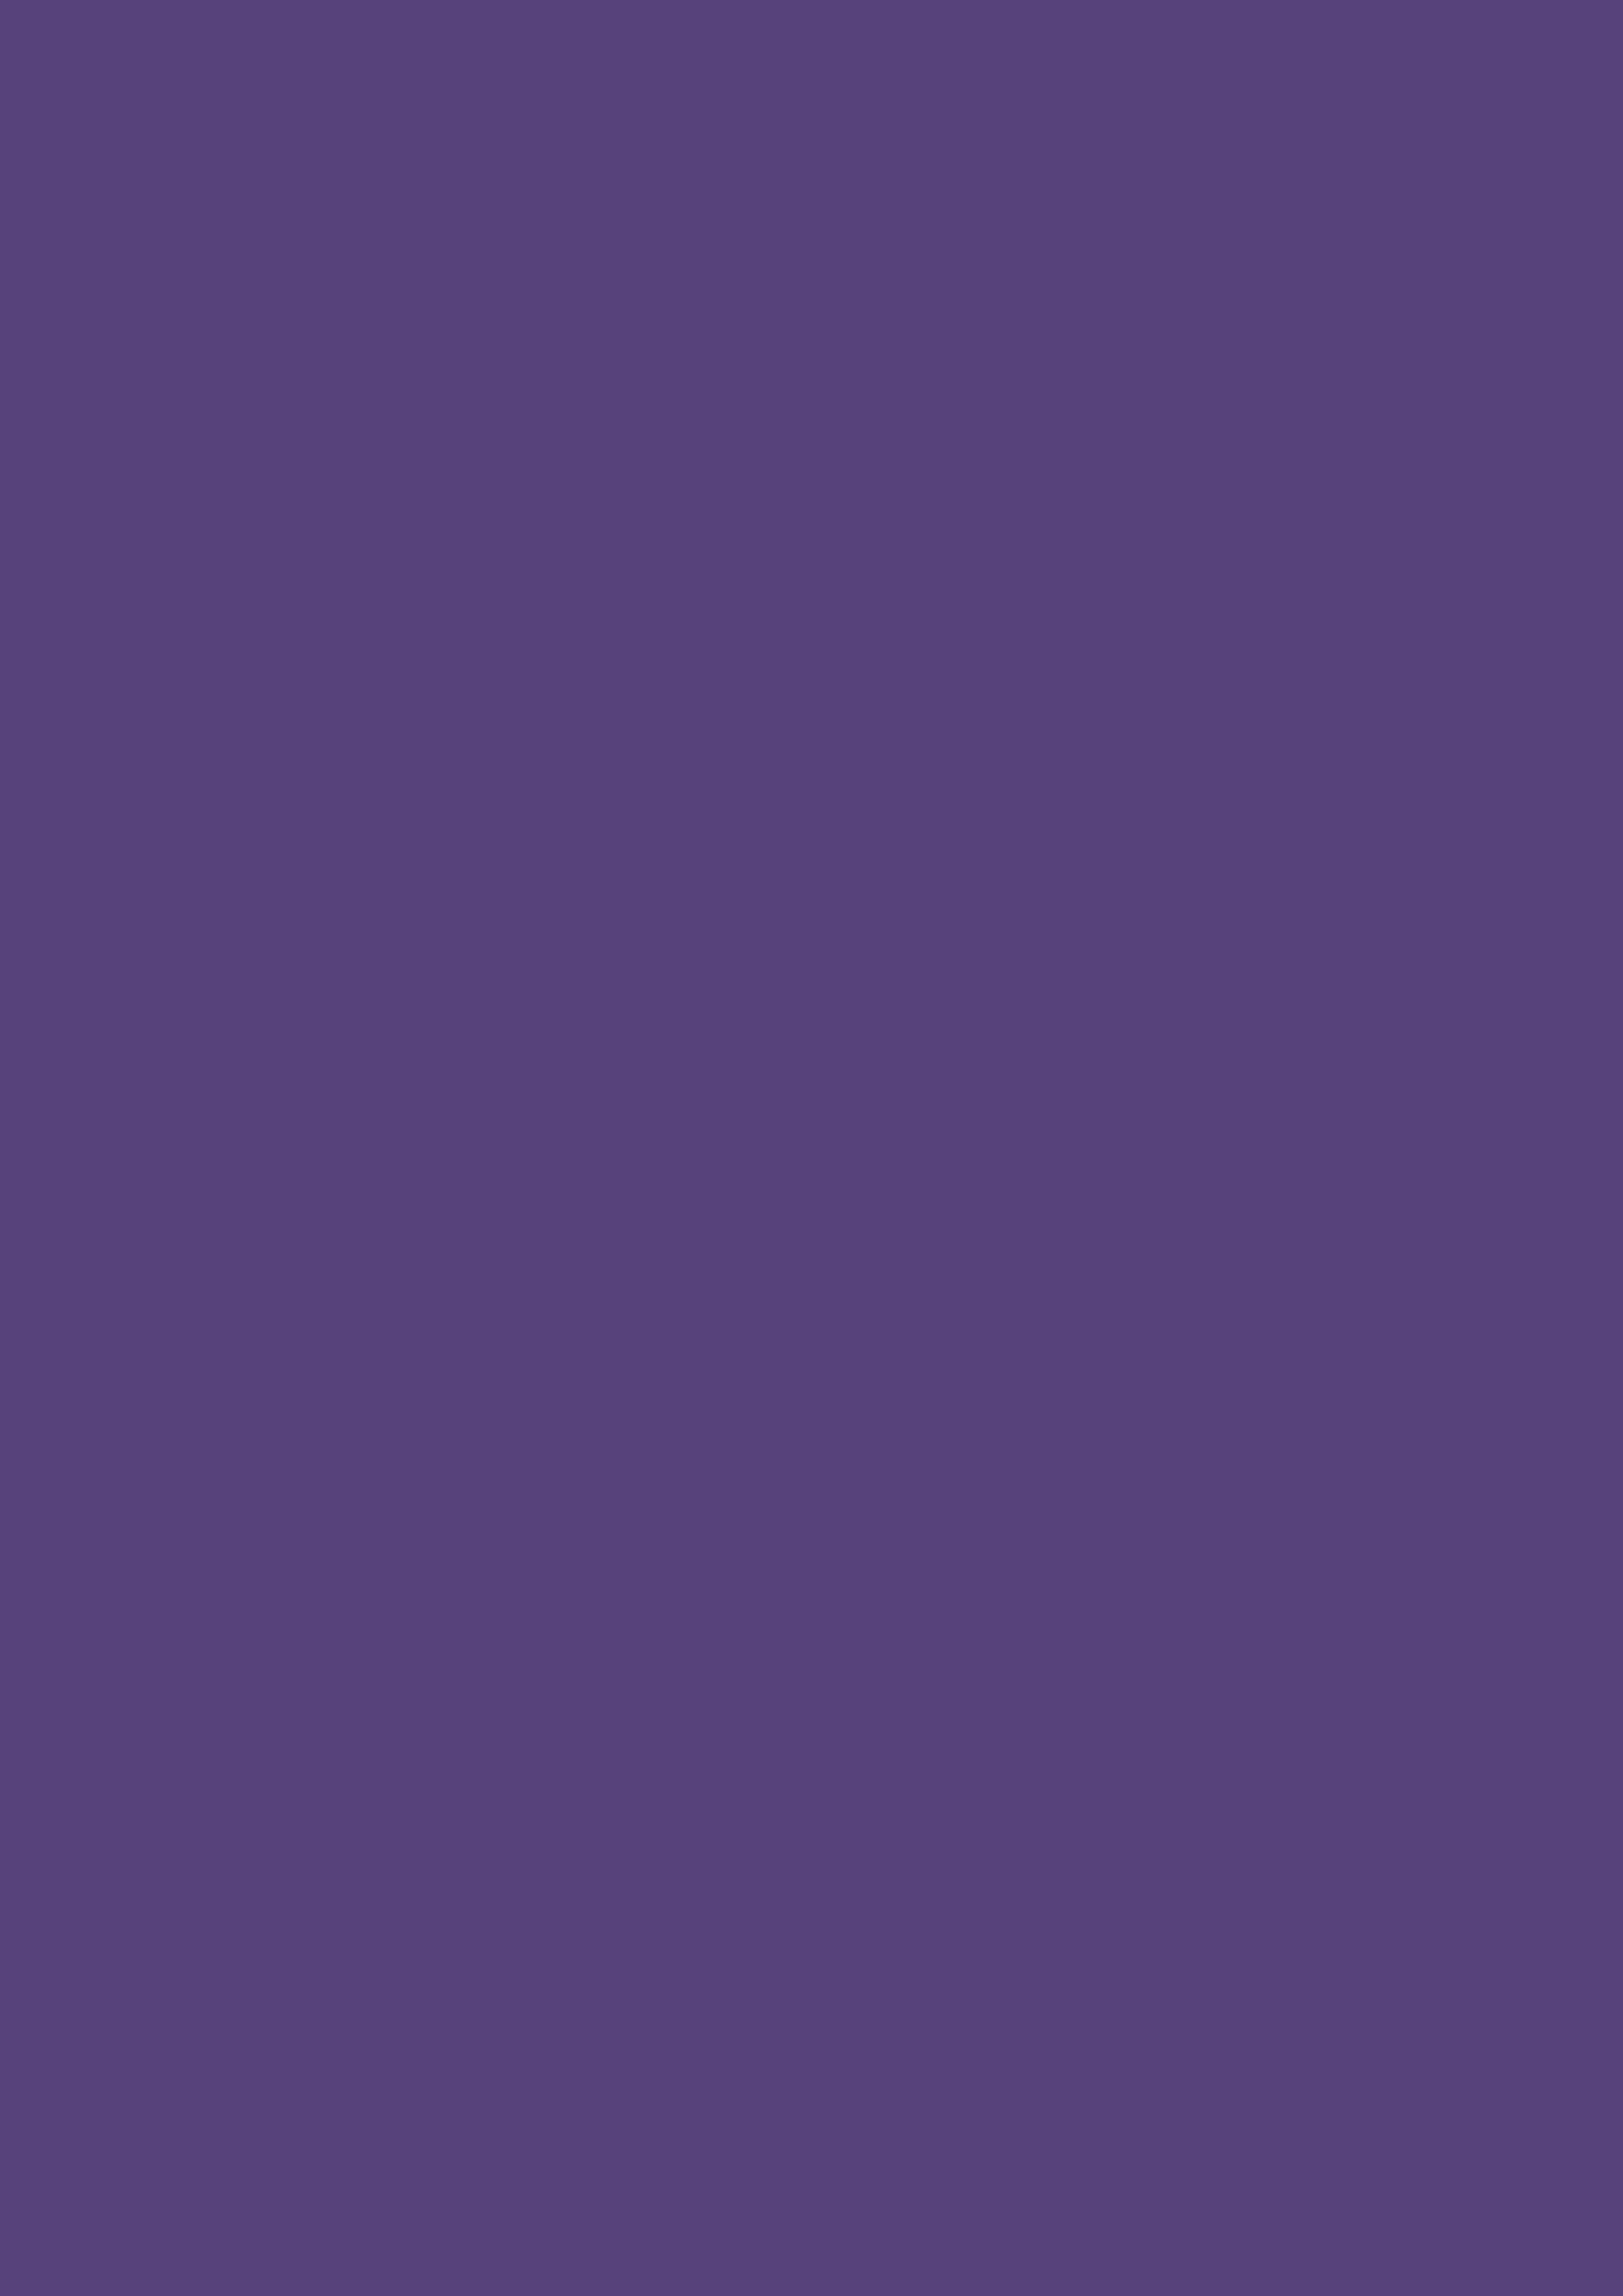 2480x3508 Cyber Grape Solid Color Background